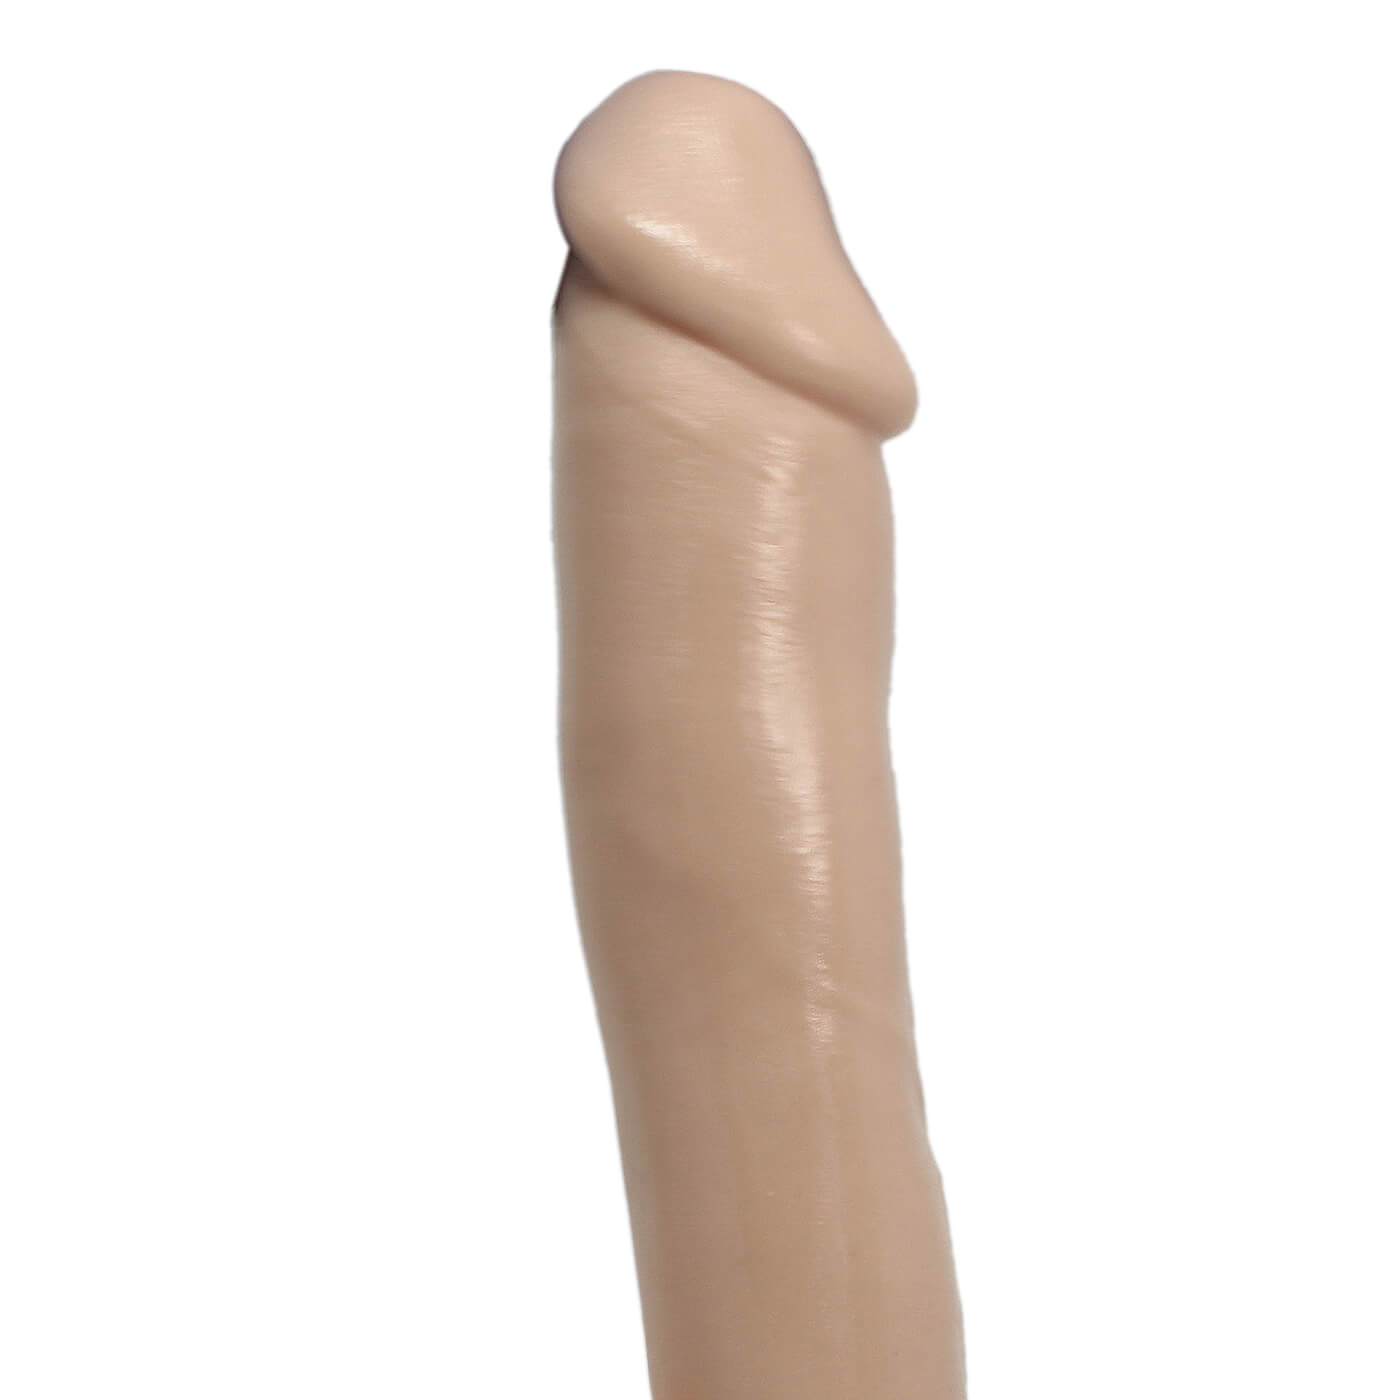 Huge vibrating dildos suction cup